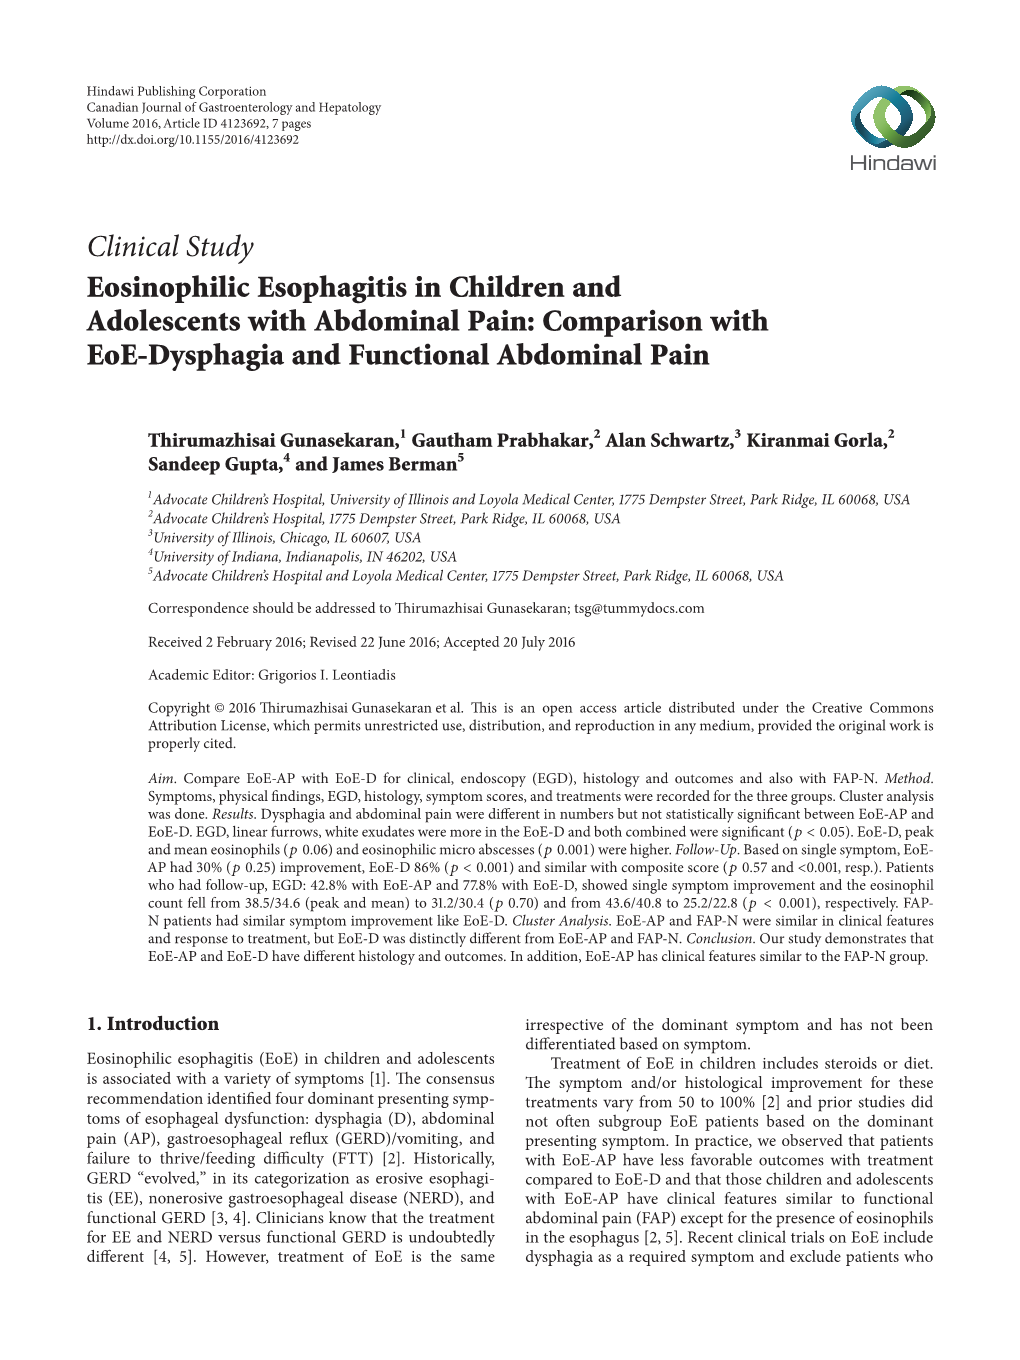 Eosinophilic Esophagitis in Children and Adolescents with Abdominal Pain: Comparison with Eoe-Dysphagia and Functional Abdominal Pain